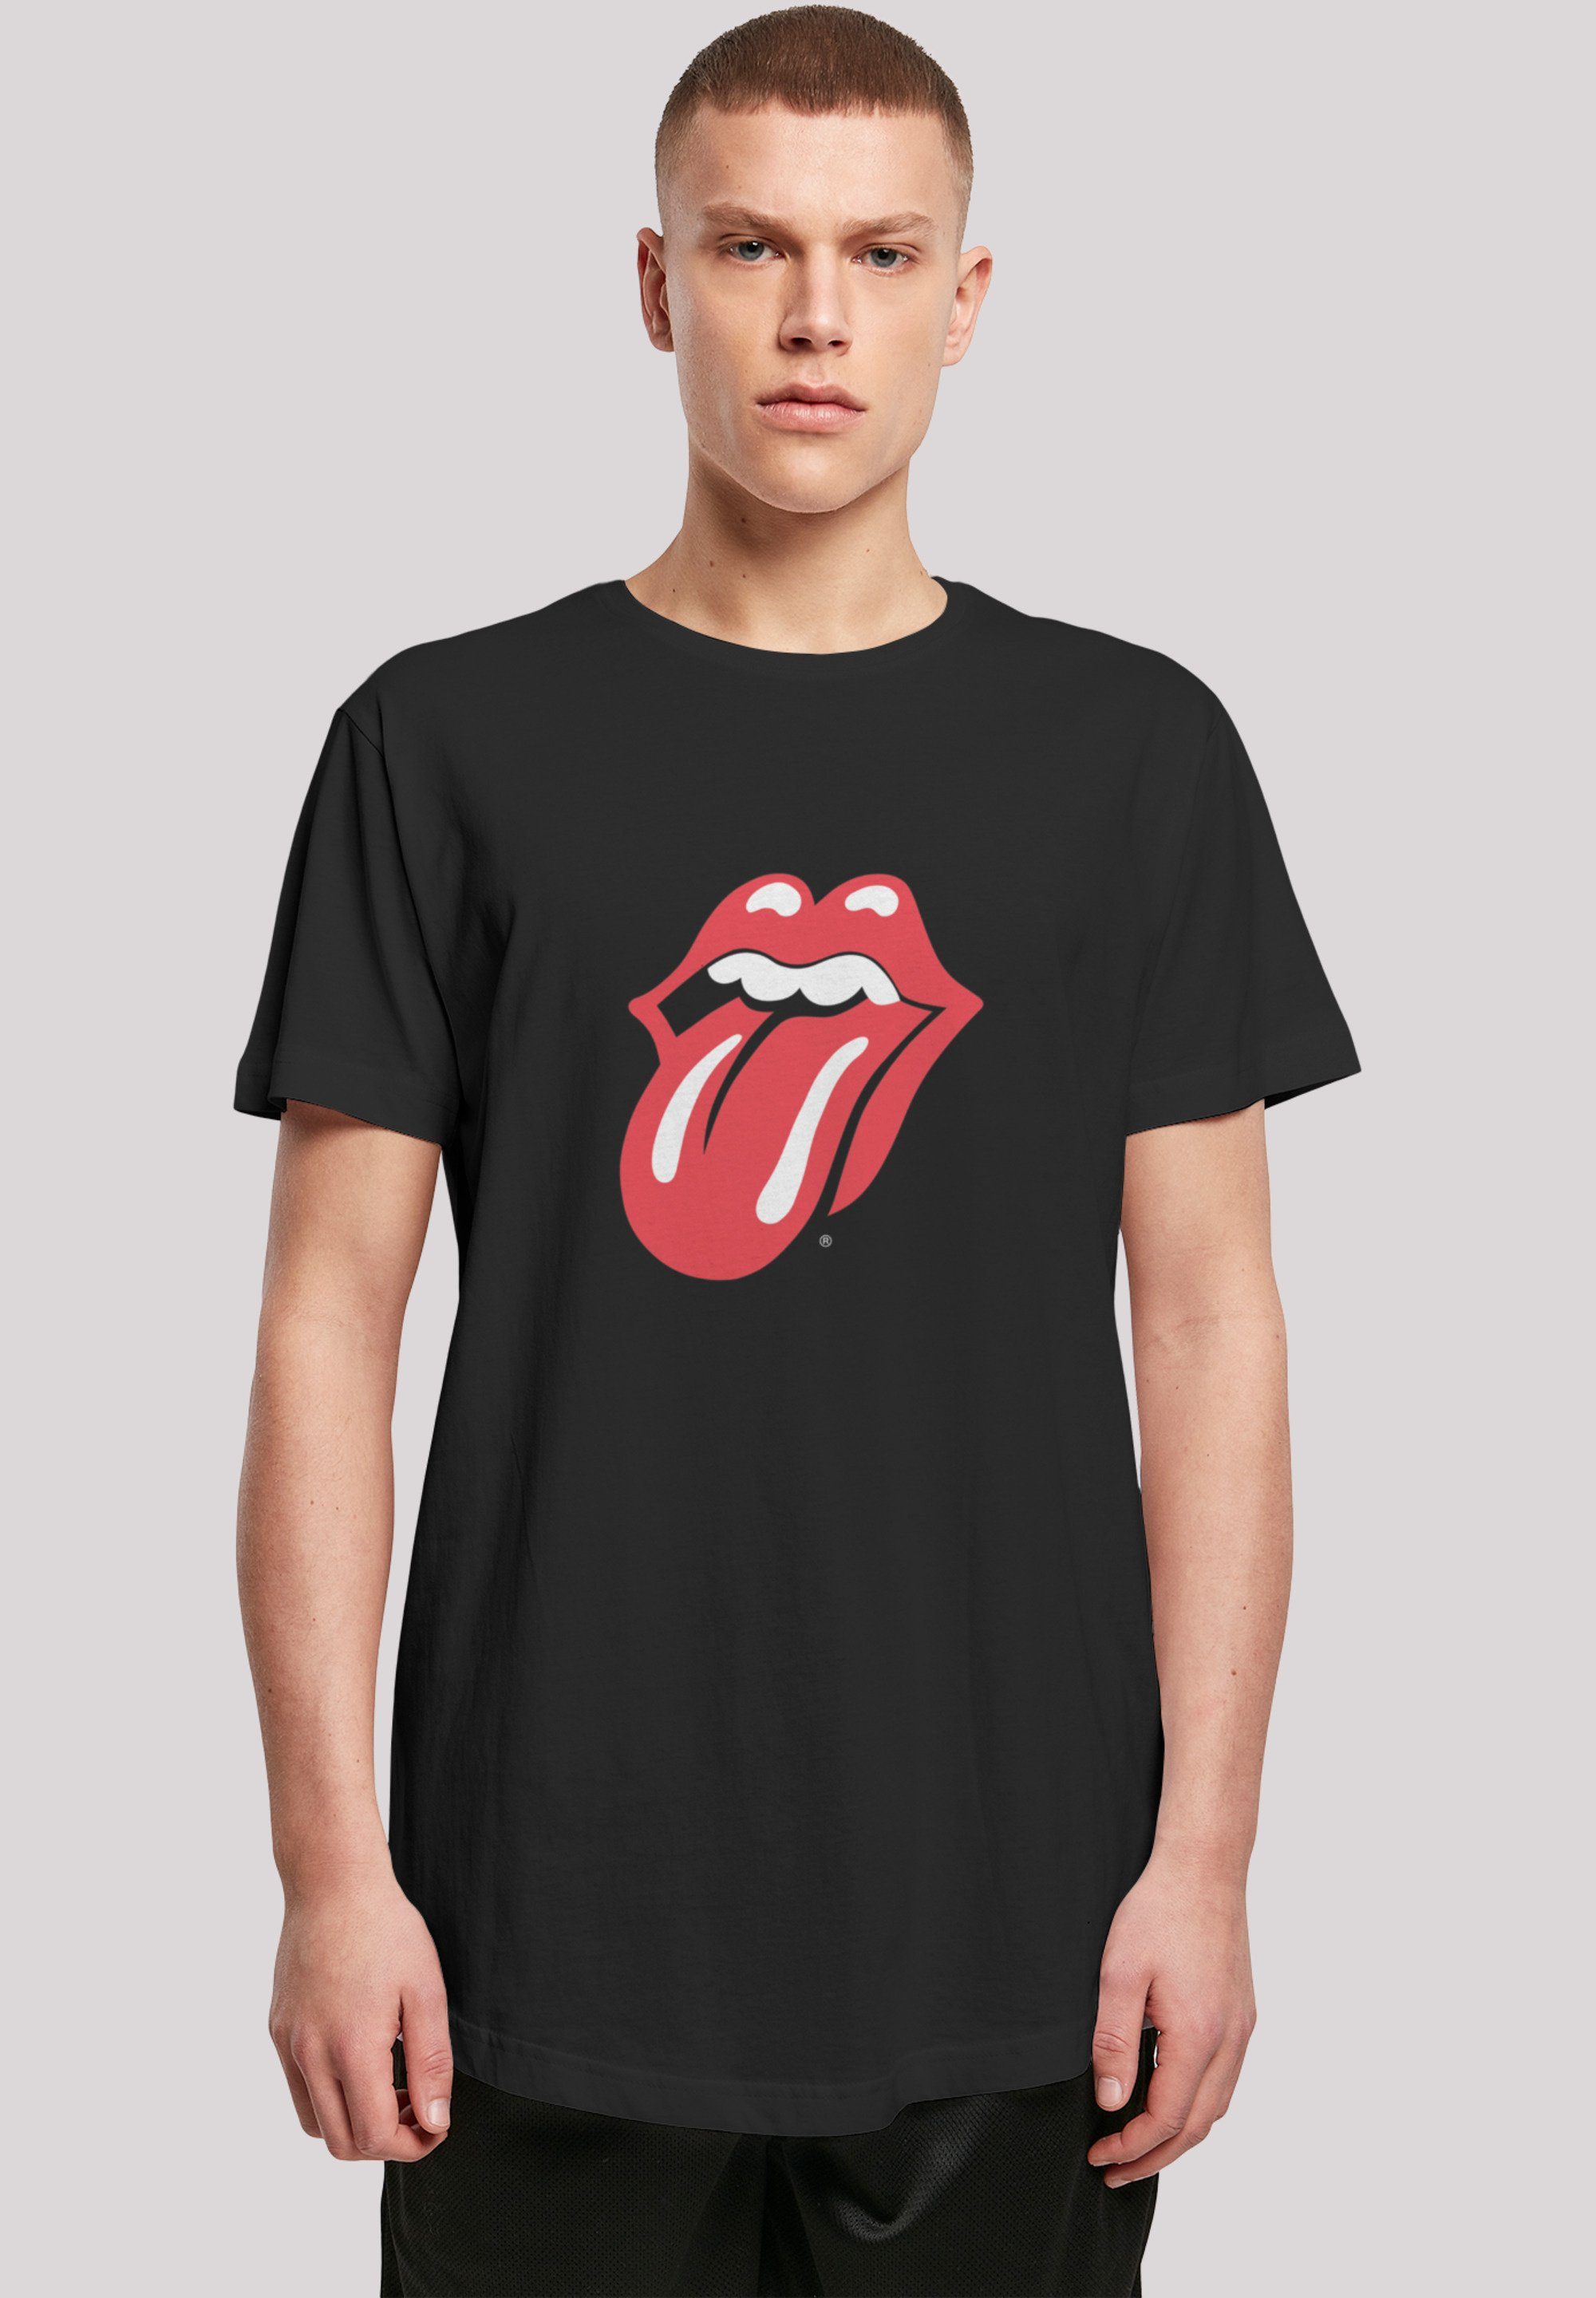 Stones Stones Print, T-Shirt Offiziell Classic Black The Rolling T-Shirt Rolling lizenziertes The Tongue Rockband F4NT4STIC